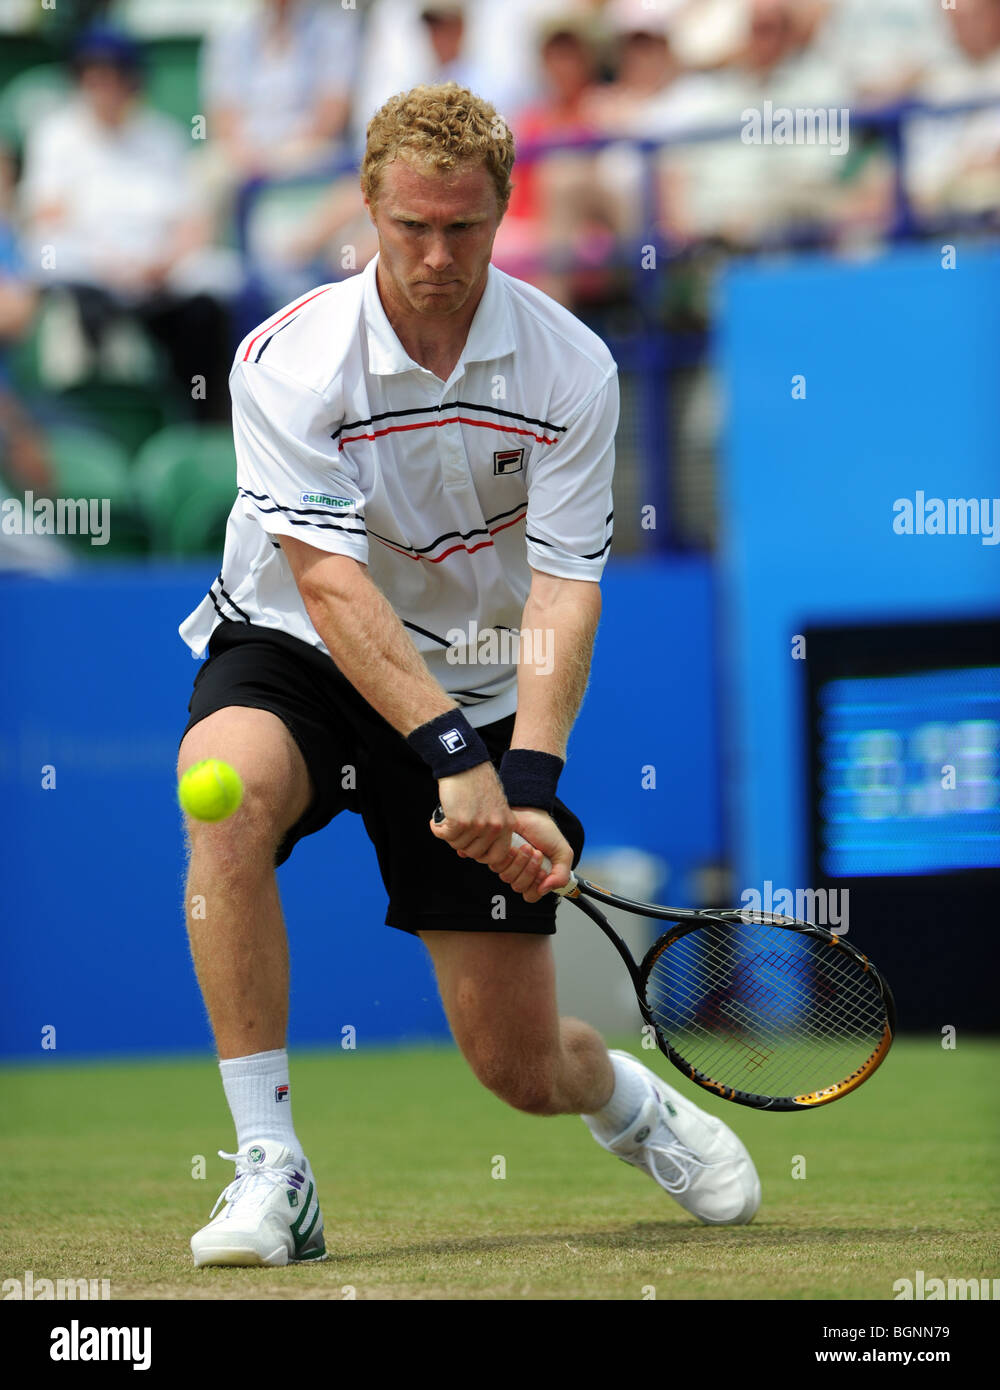 Dmitry Tursunov in action at the Aegon International 2009 Tennis Championships at Devonshire Park Eastbourne Stock Photo